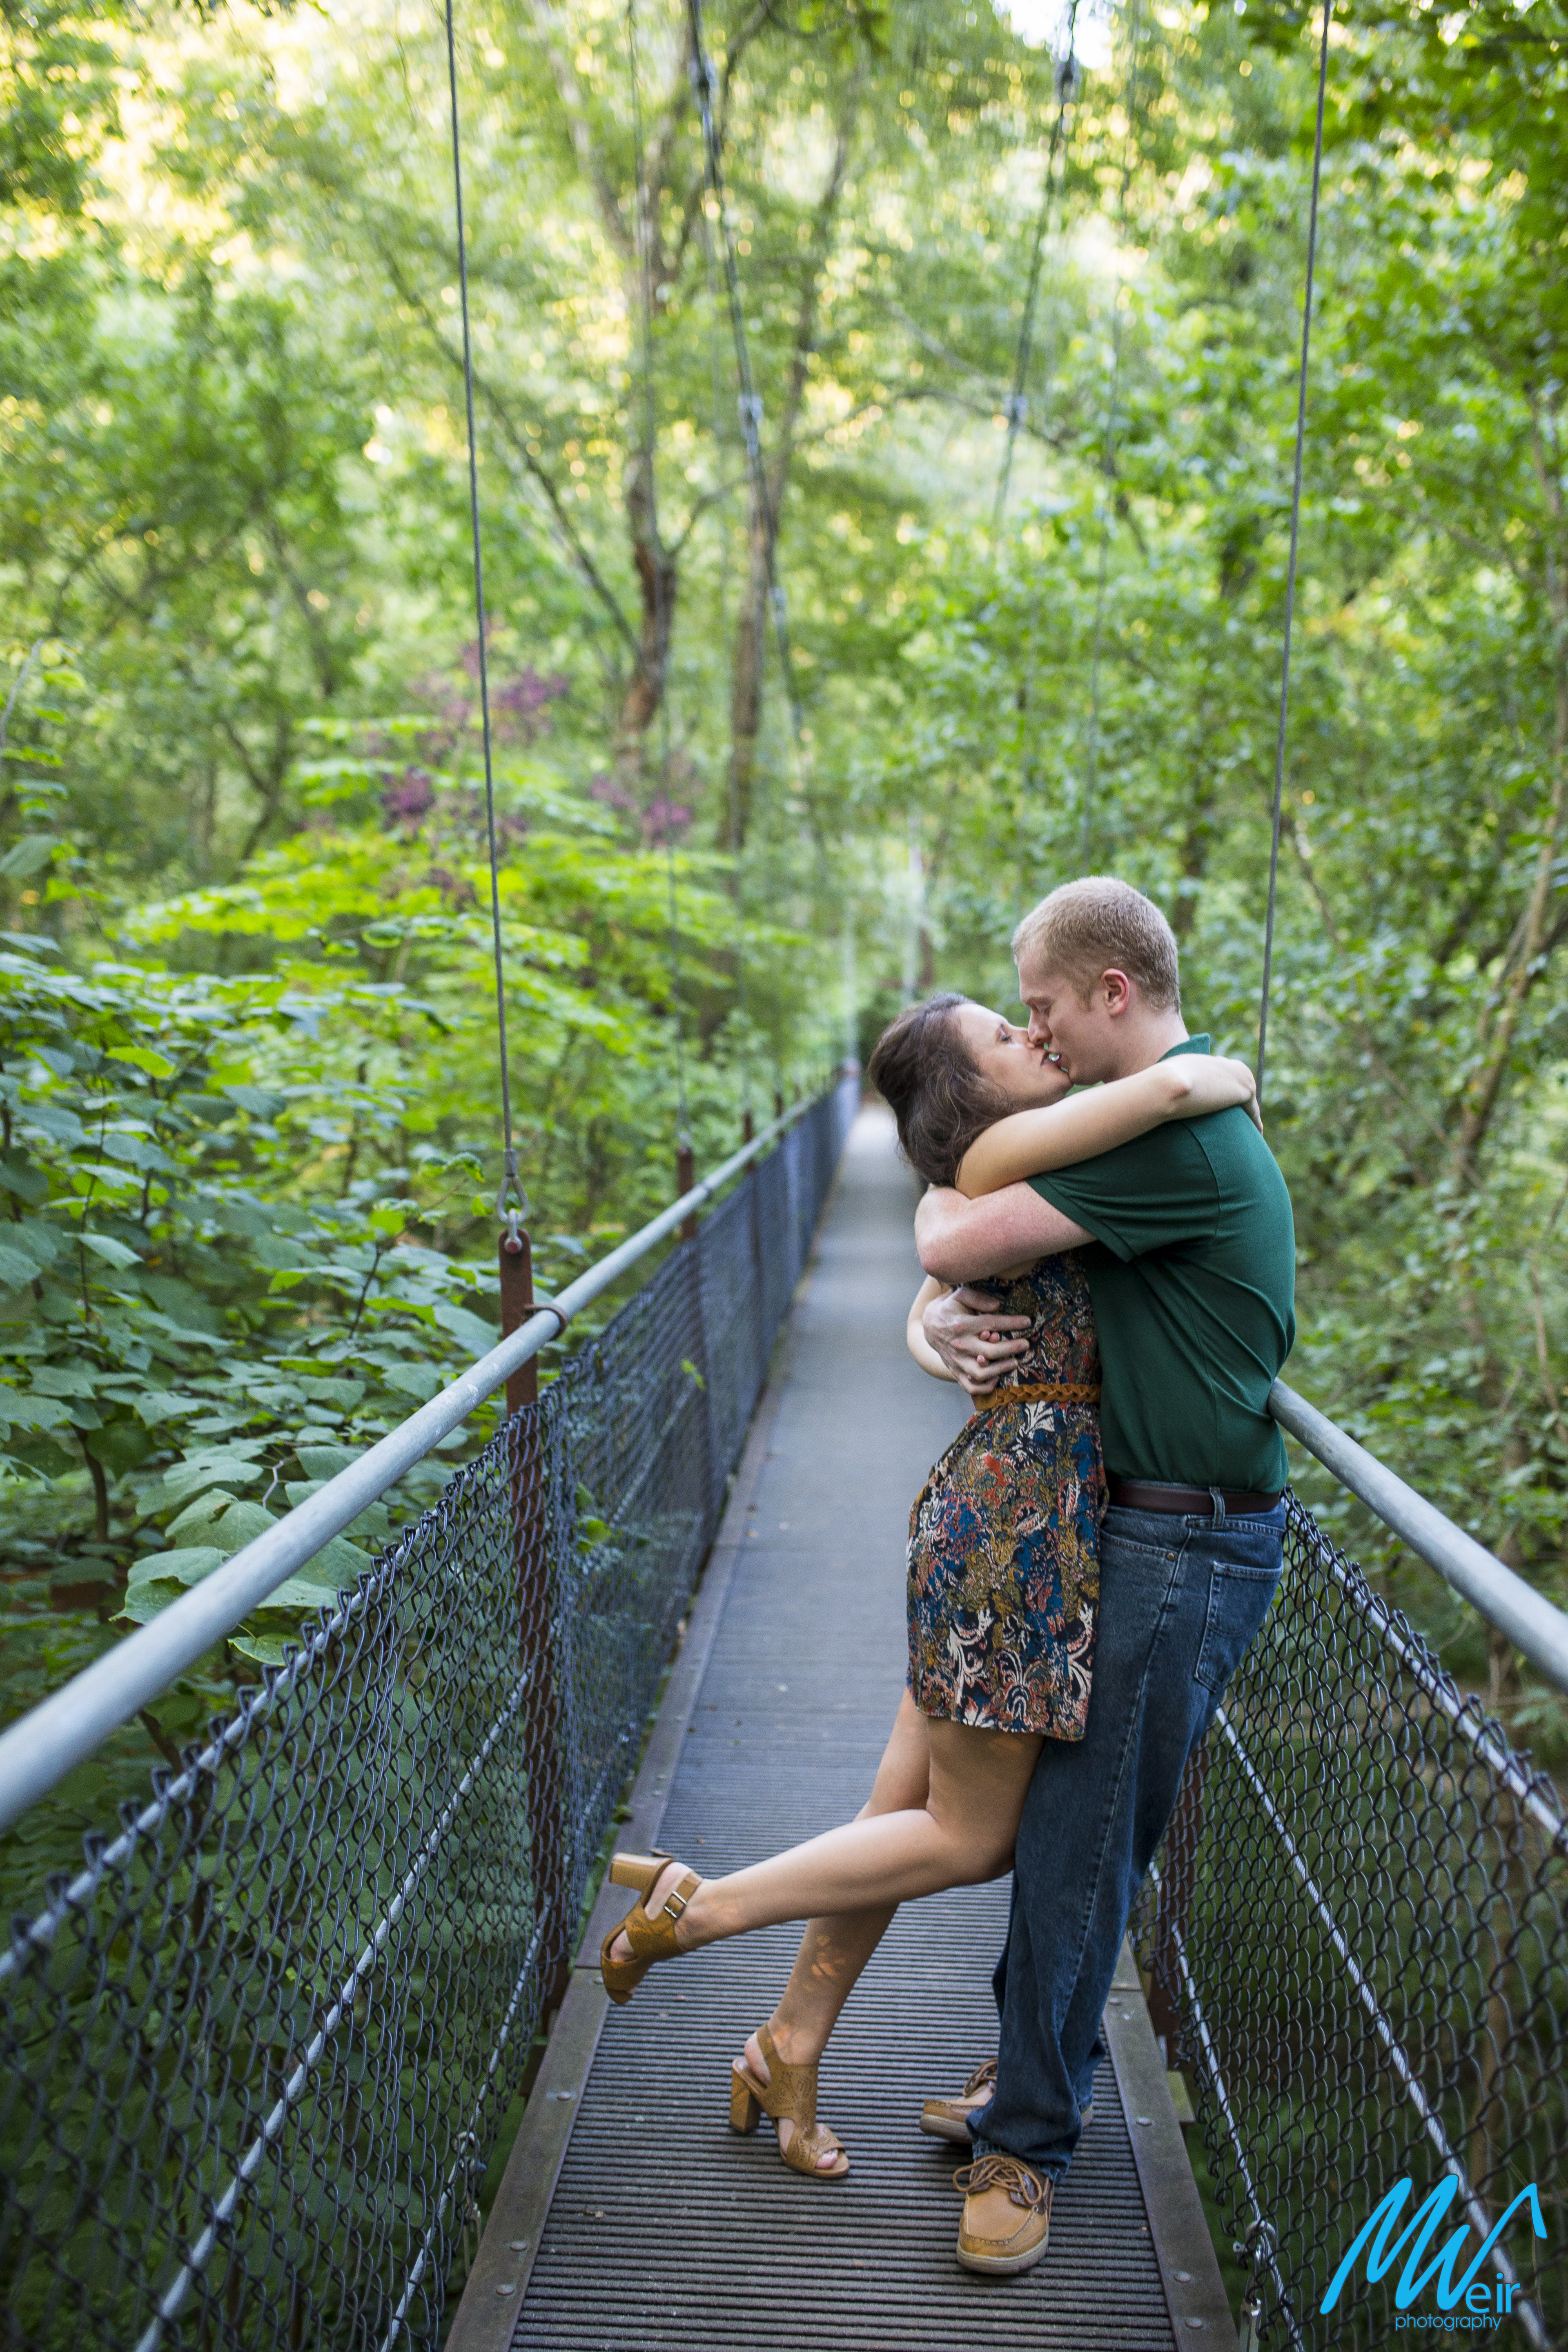 bride kisses groom on a suspension bridge in a forest